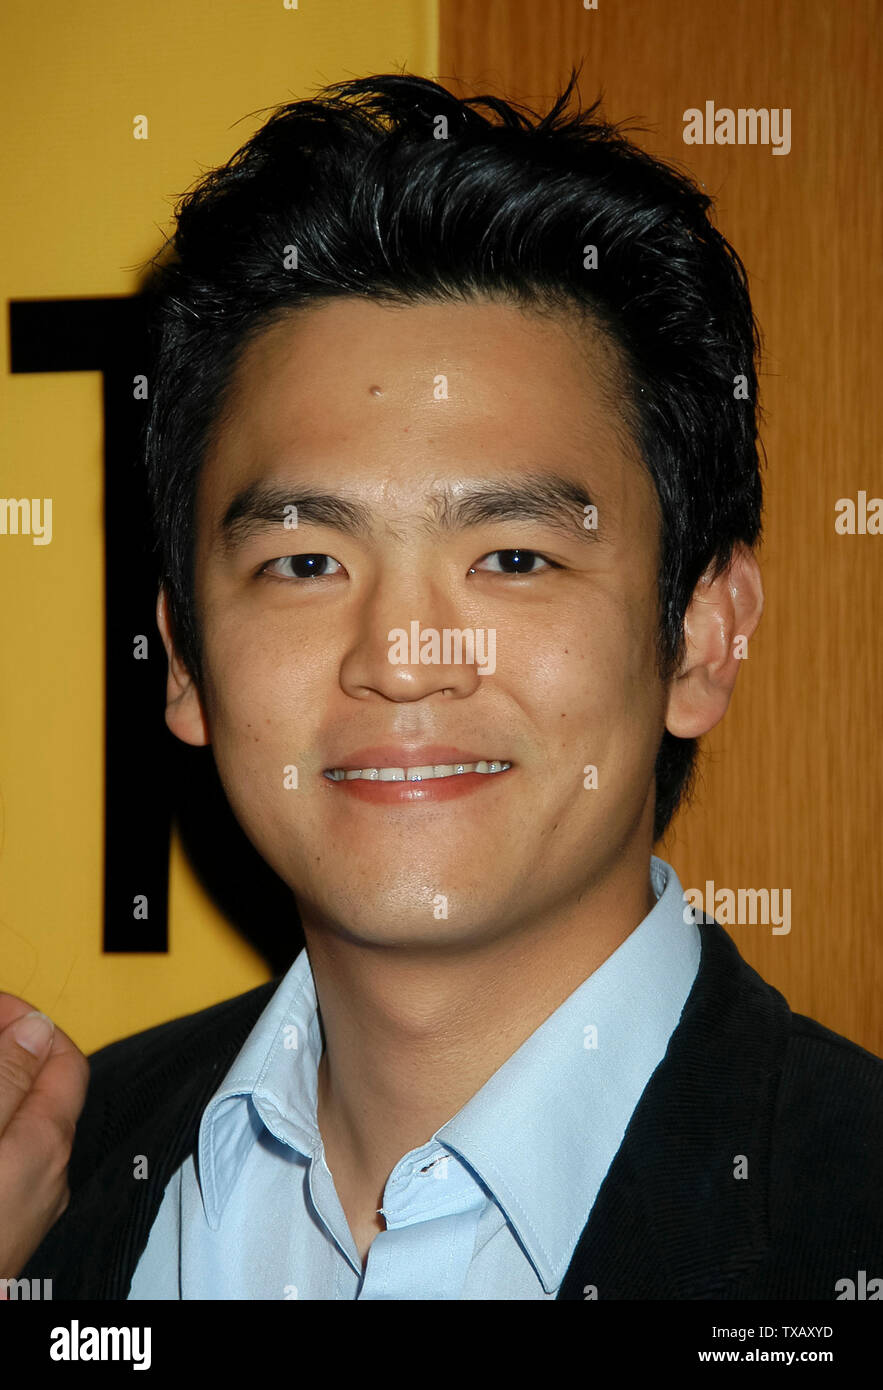 John Cho at the VCFilmFest 2004, The 20th LA Asian Pacific Film Festival - Opening Night Gala at the Directors Guild of America in West Hollywood, CA. The event took place on Thursday, April 29, 2004. Photo by: SBM / PictureLux  -  File Reference # 33790-3643SMBPLX Stock Photo